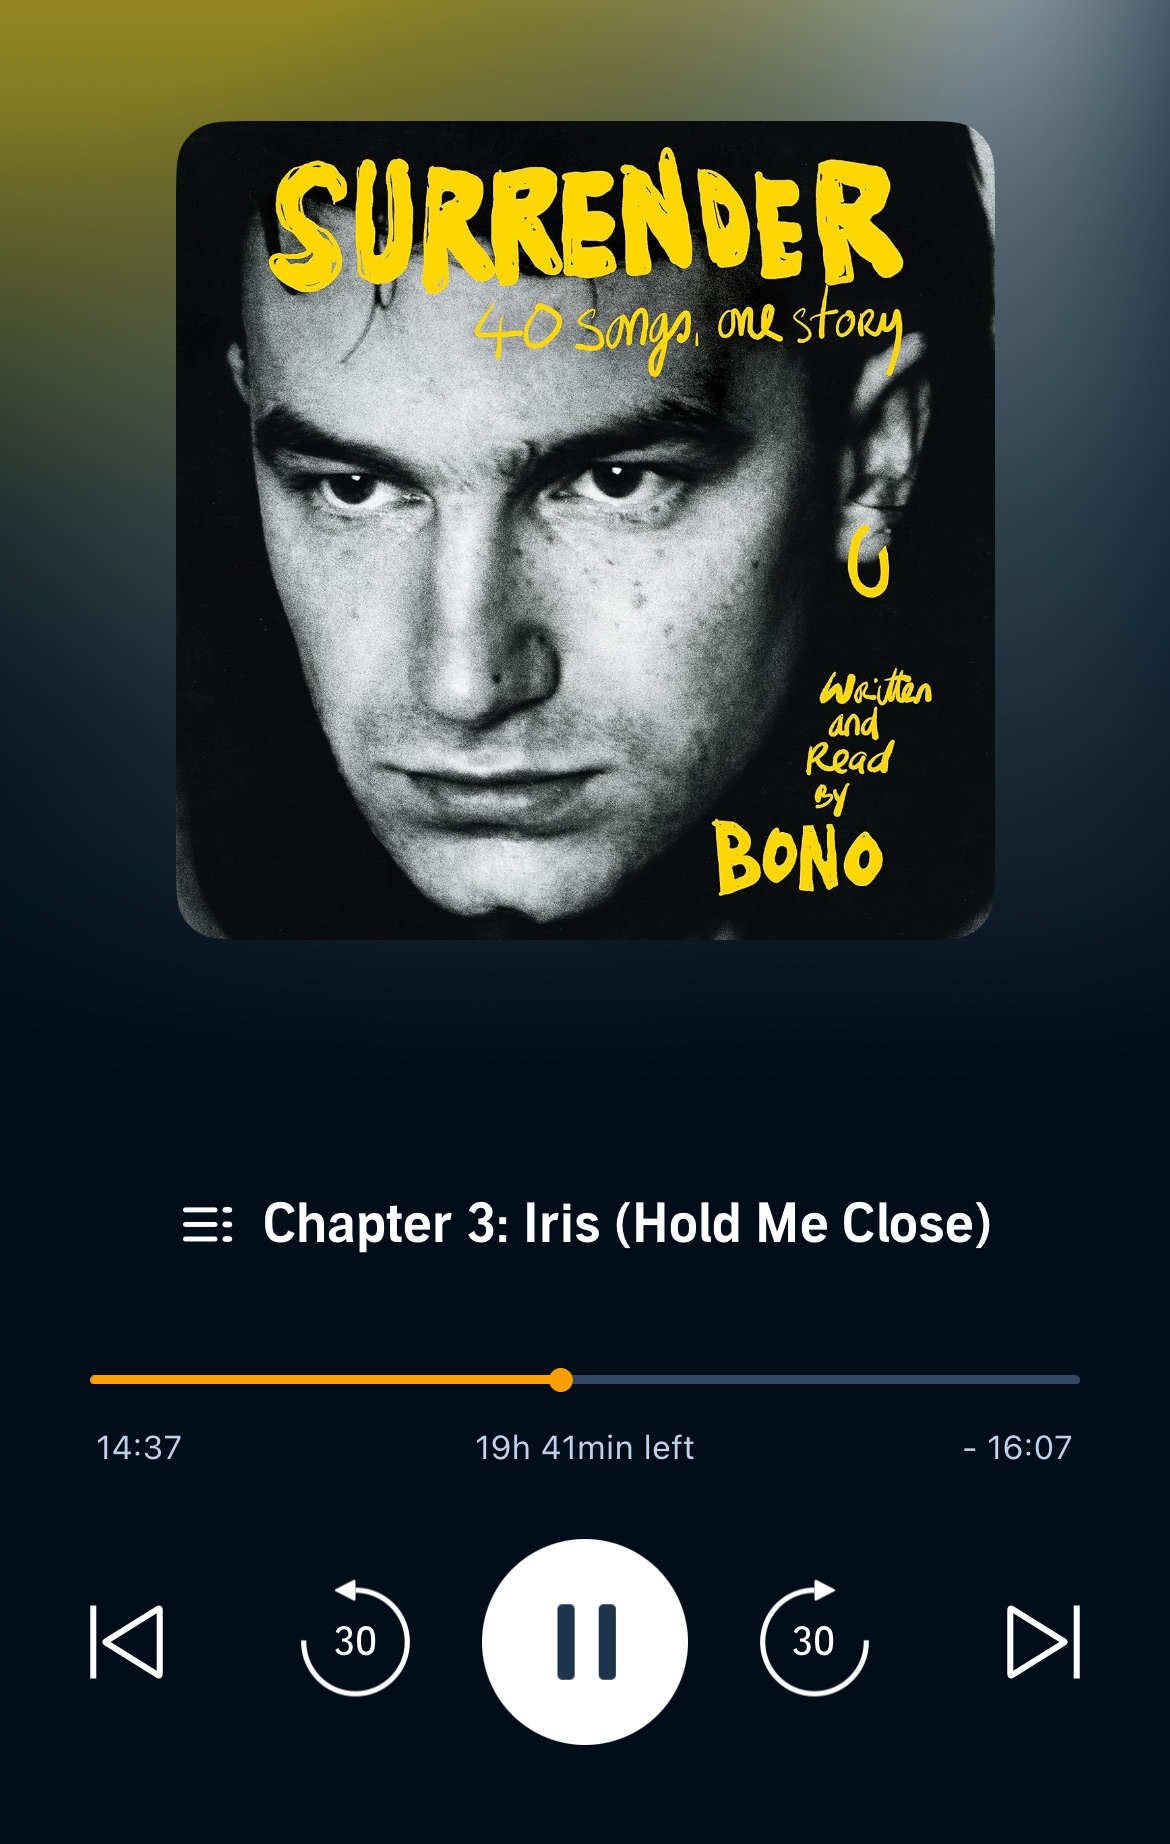 Surrender book cover by Bono on Audible. 